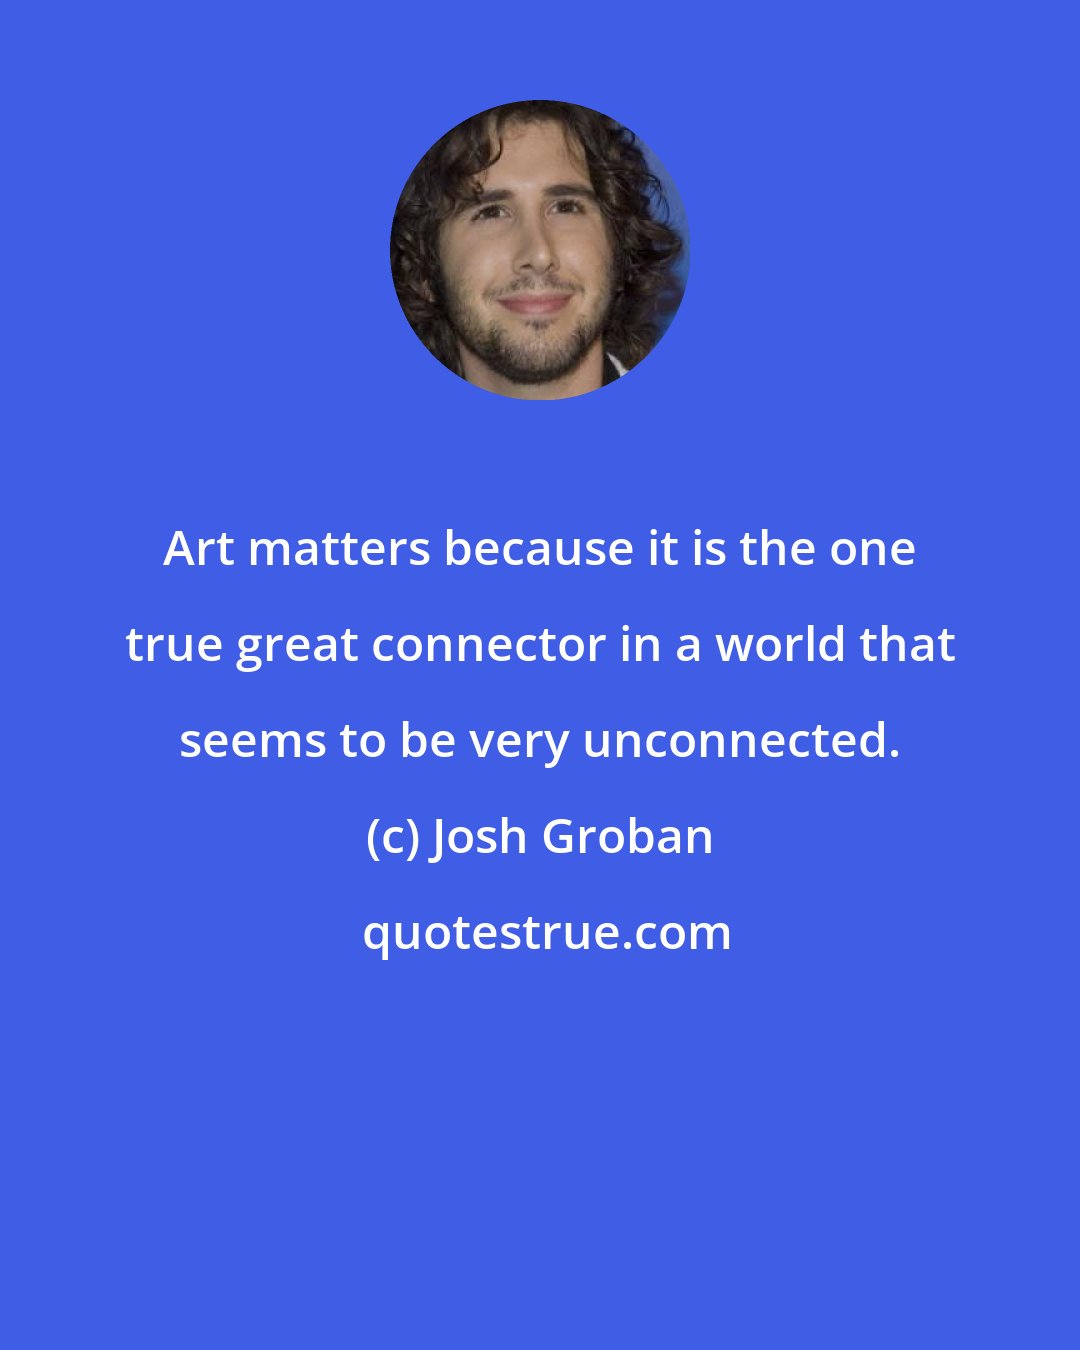 Josh Groban: Art matters because it is the one true great connector in a world that seems to be very unconnected.